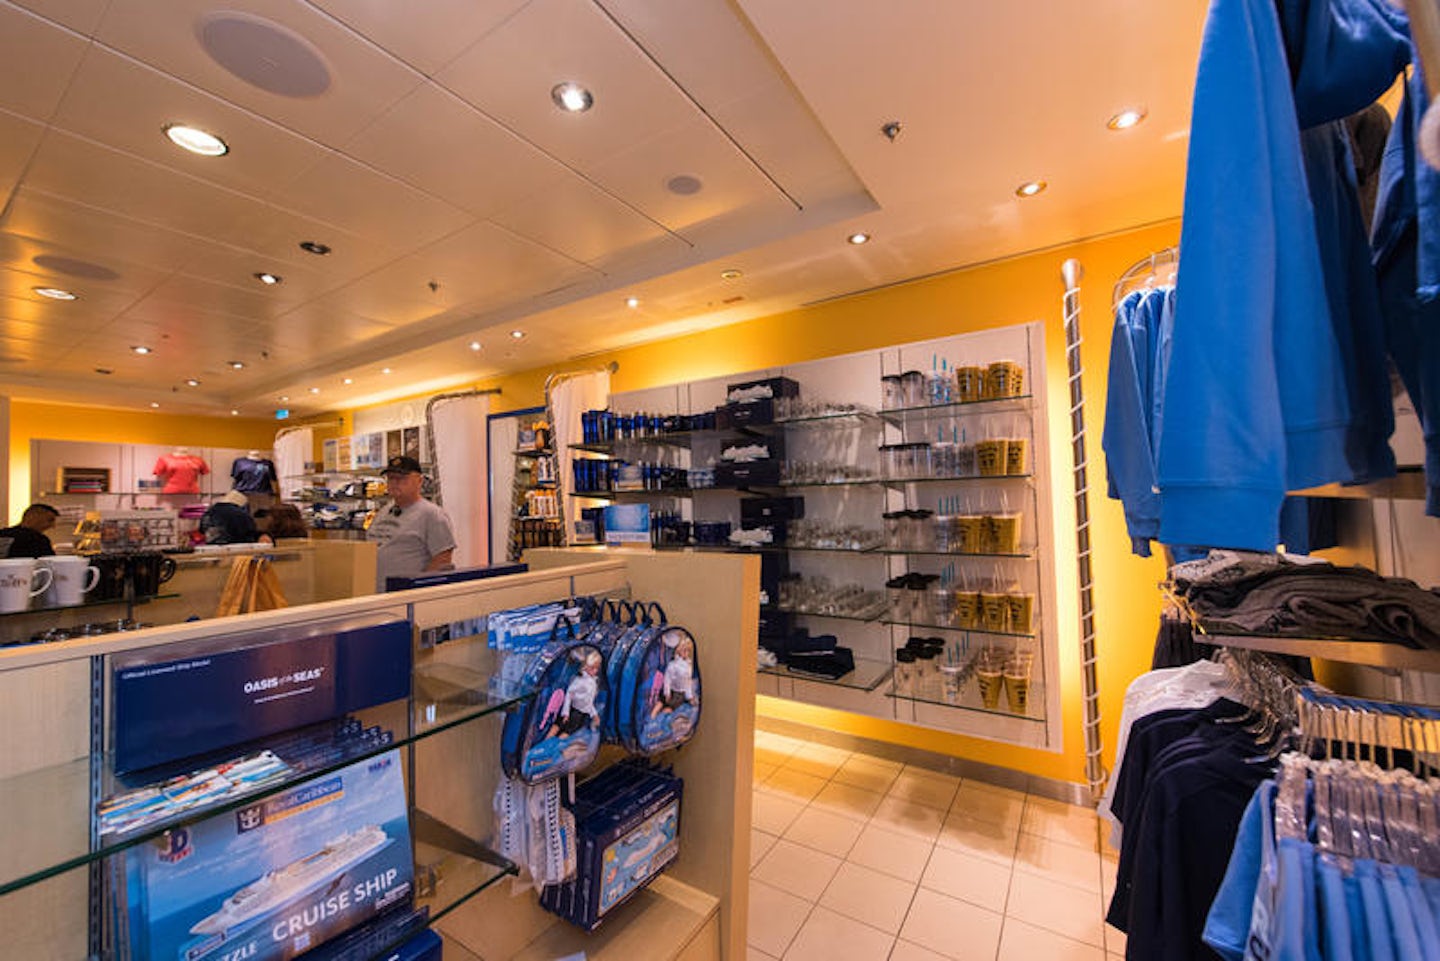 The Shop on Oasis of the Seas